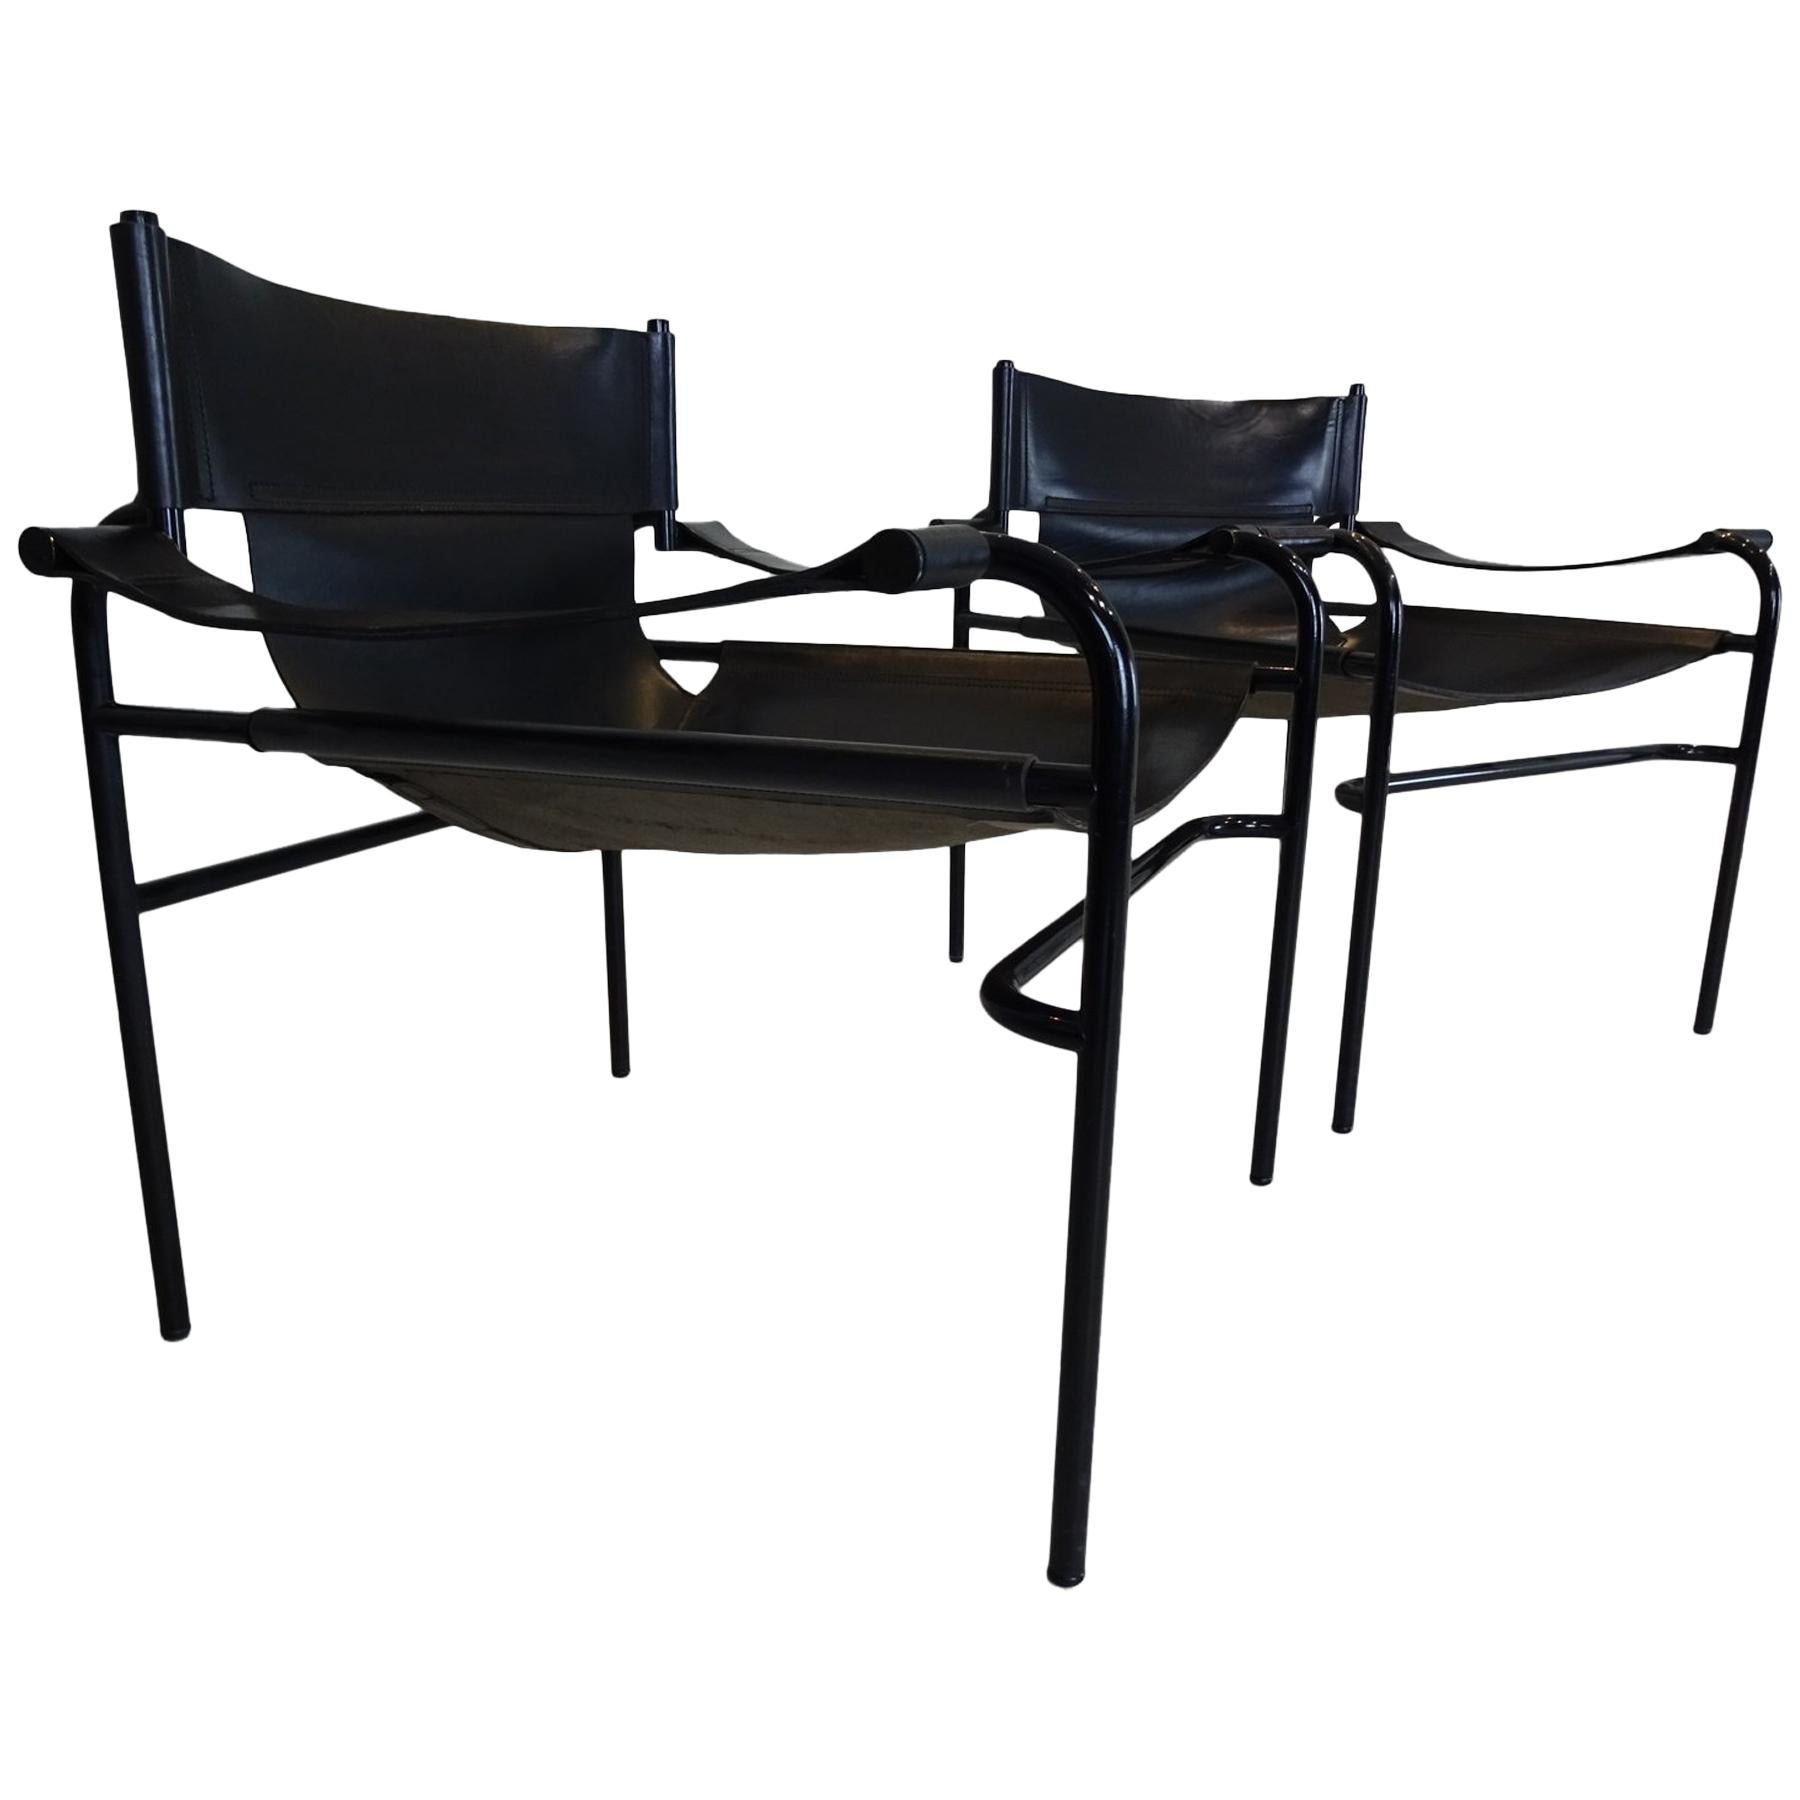 Midcentury Black Leather Lounge Chairs by Walter Antonis for ‘t Spectrum